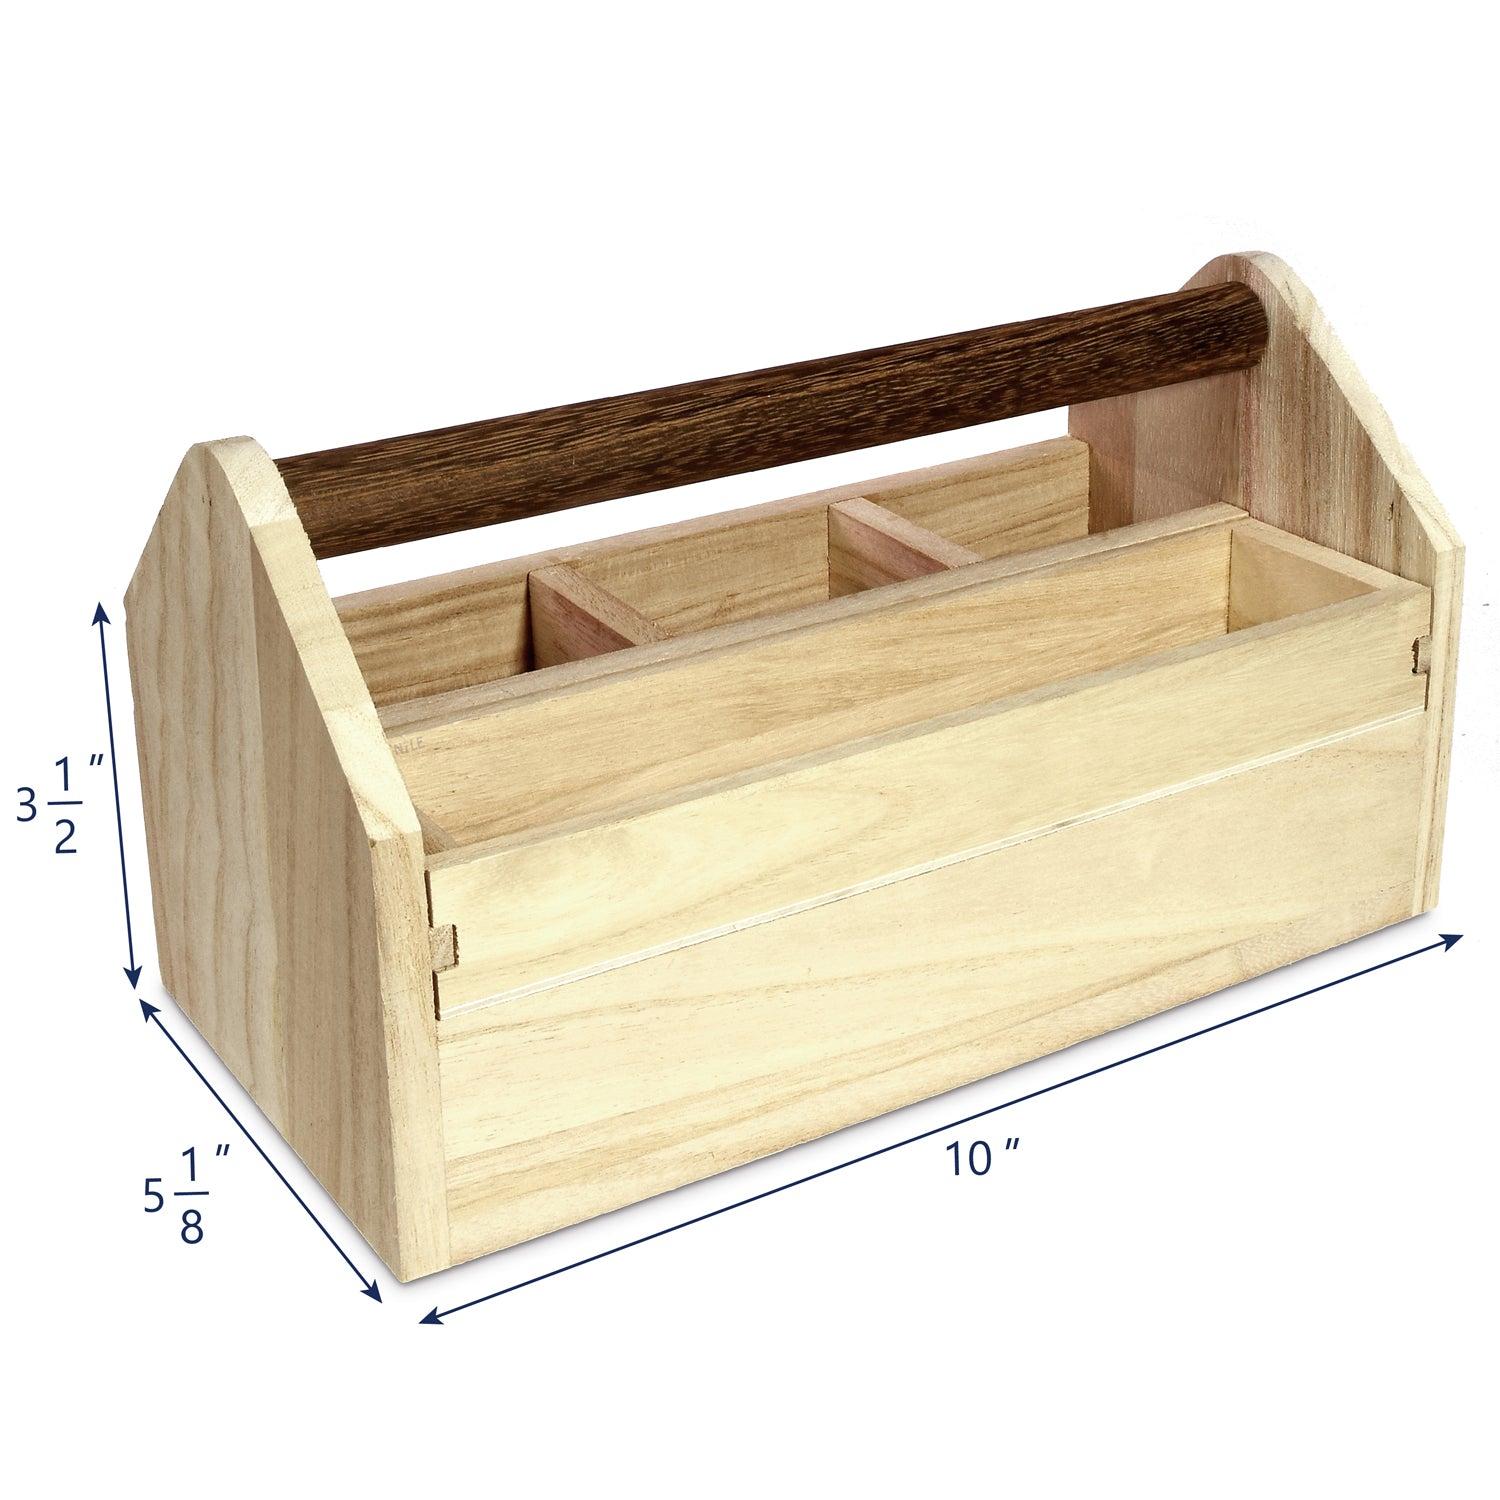 wooden boxes designs